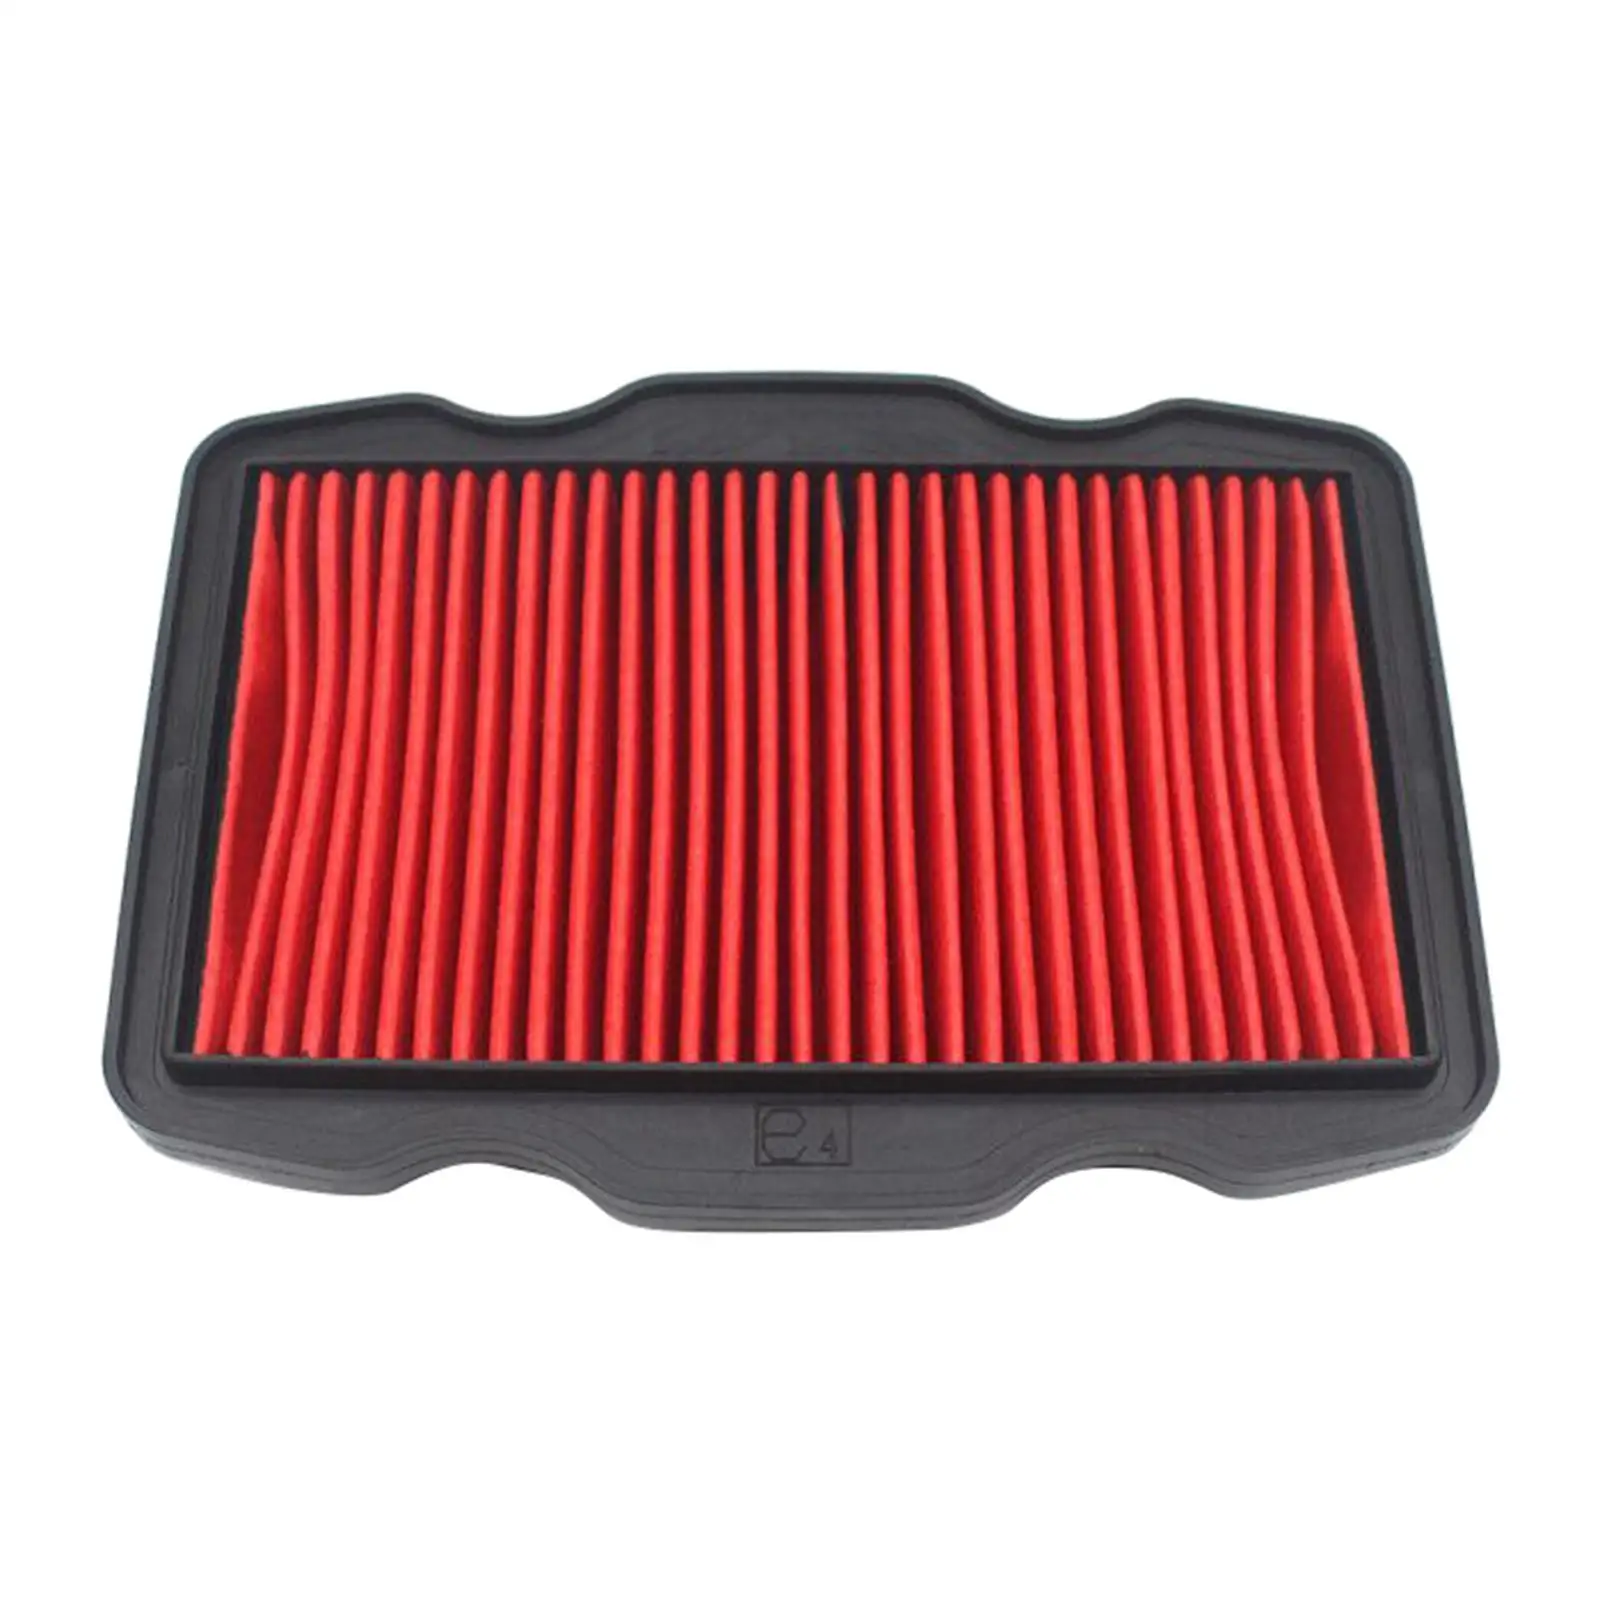 Motorcycle Air Filter Sponge Durable Fits for  17211-KPN-A70 5F GLR125 9